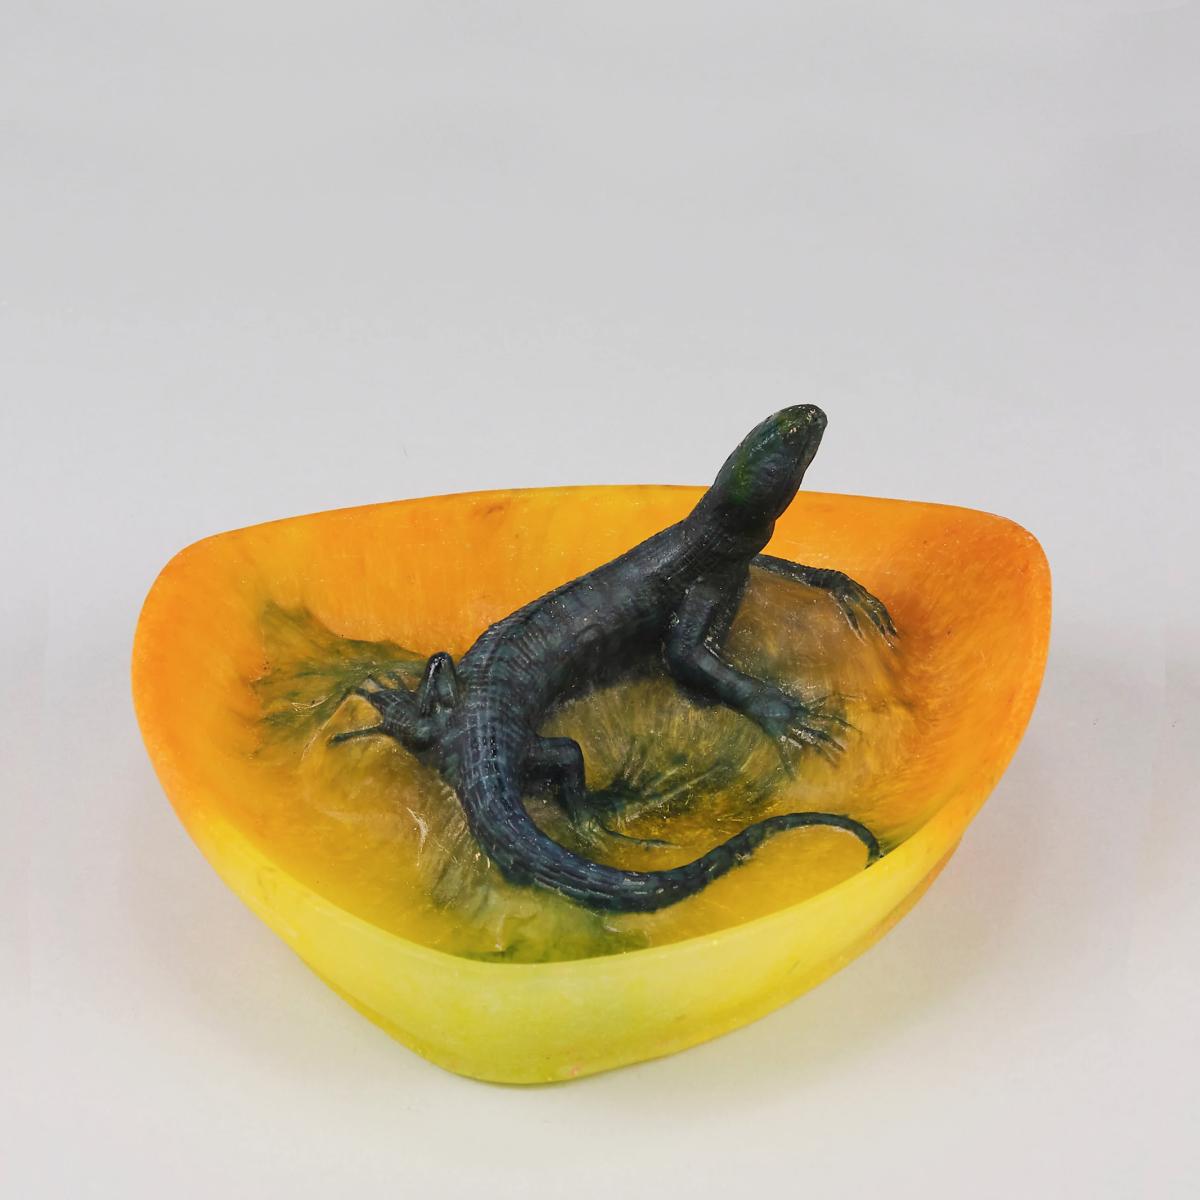 Early 20th Century Pate-de-Verre Vide Poche entitled "Lizard Tray" by  Amalric Walter | BADA